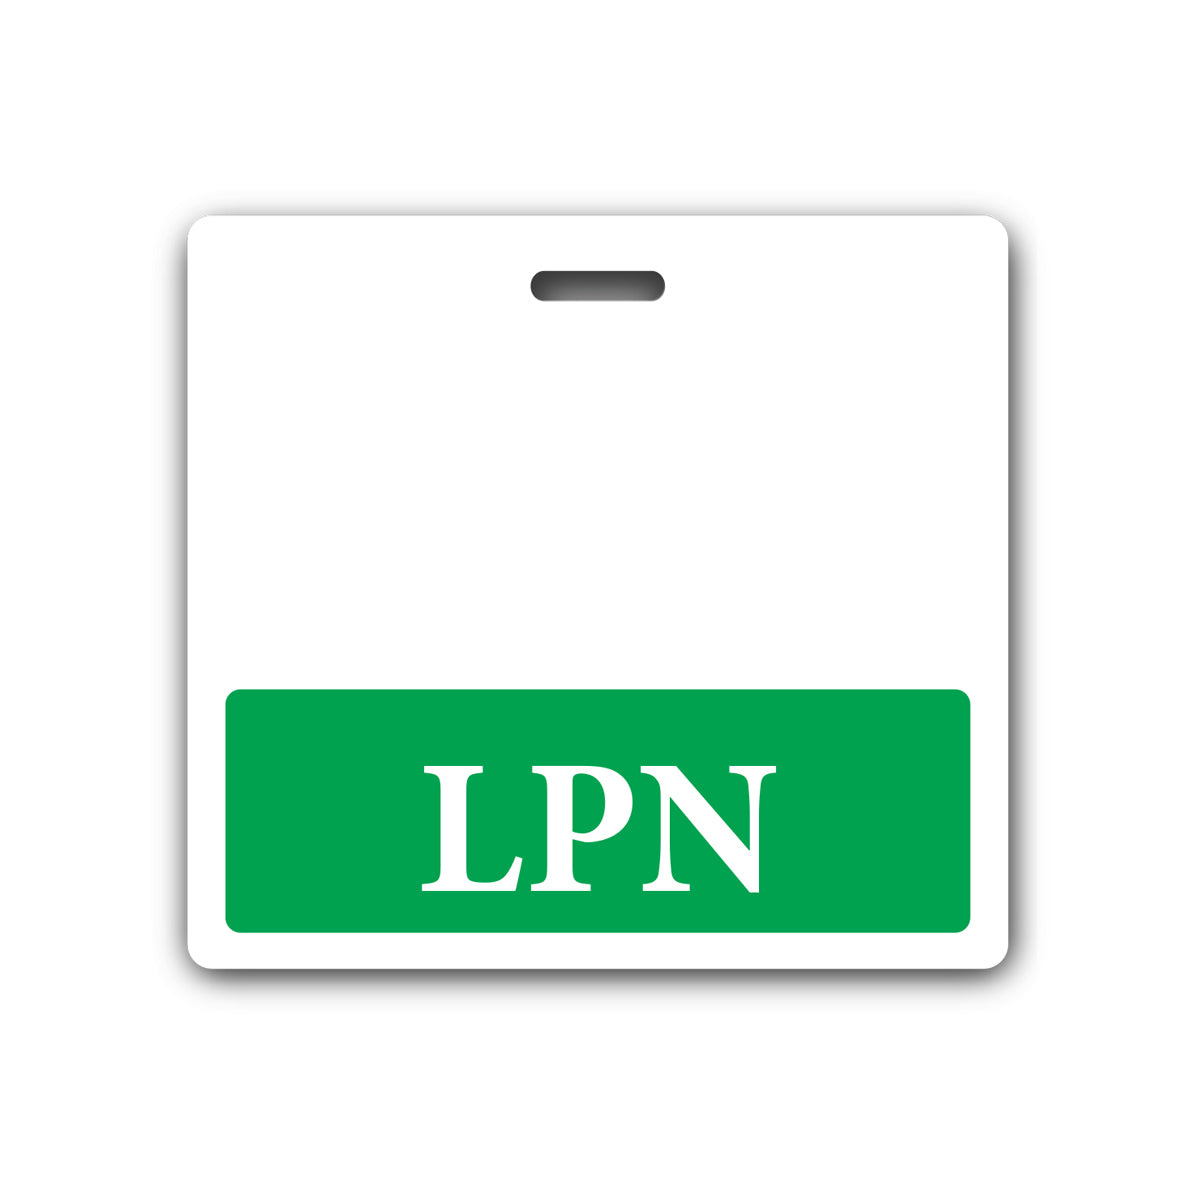 A white badge with a green section at the bottom displaying the text "LPN" in white letters, perfect for role recognition in a hospital environment can be replaced with the LPN Horizontal Badge Buddy with Green Border.